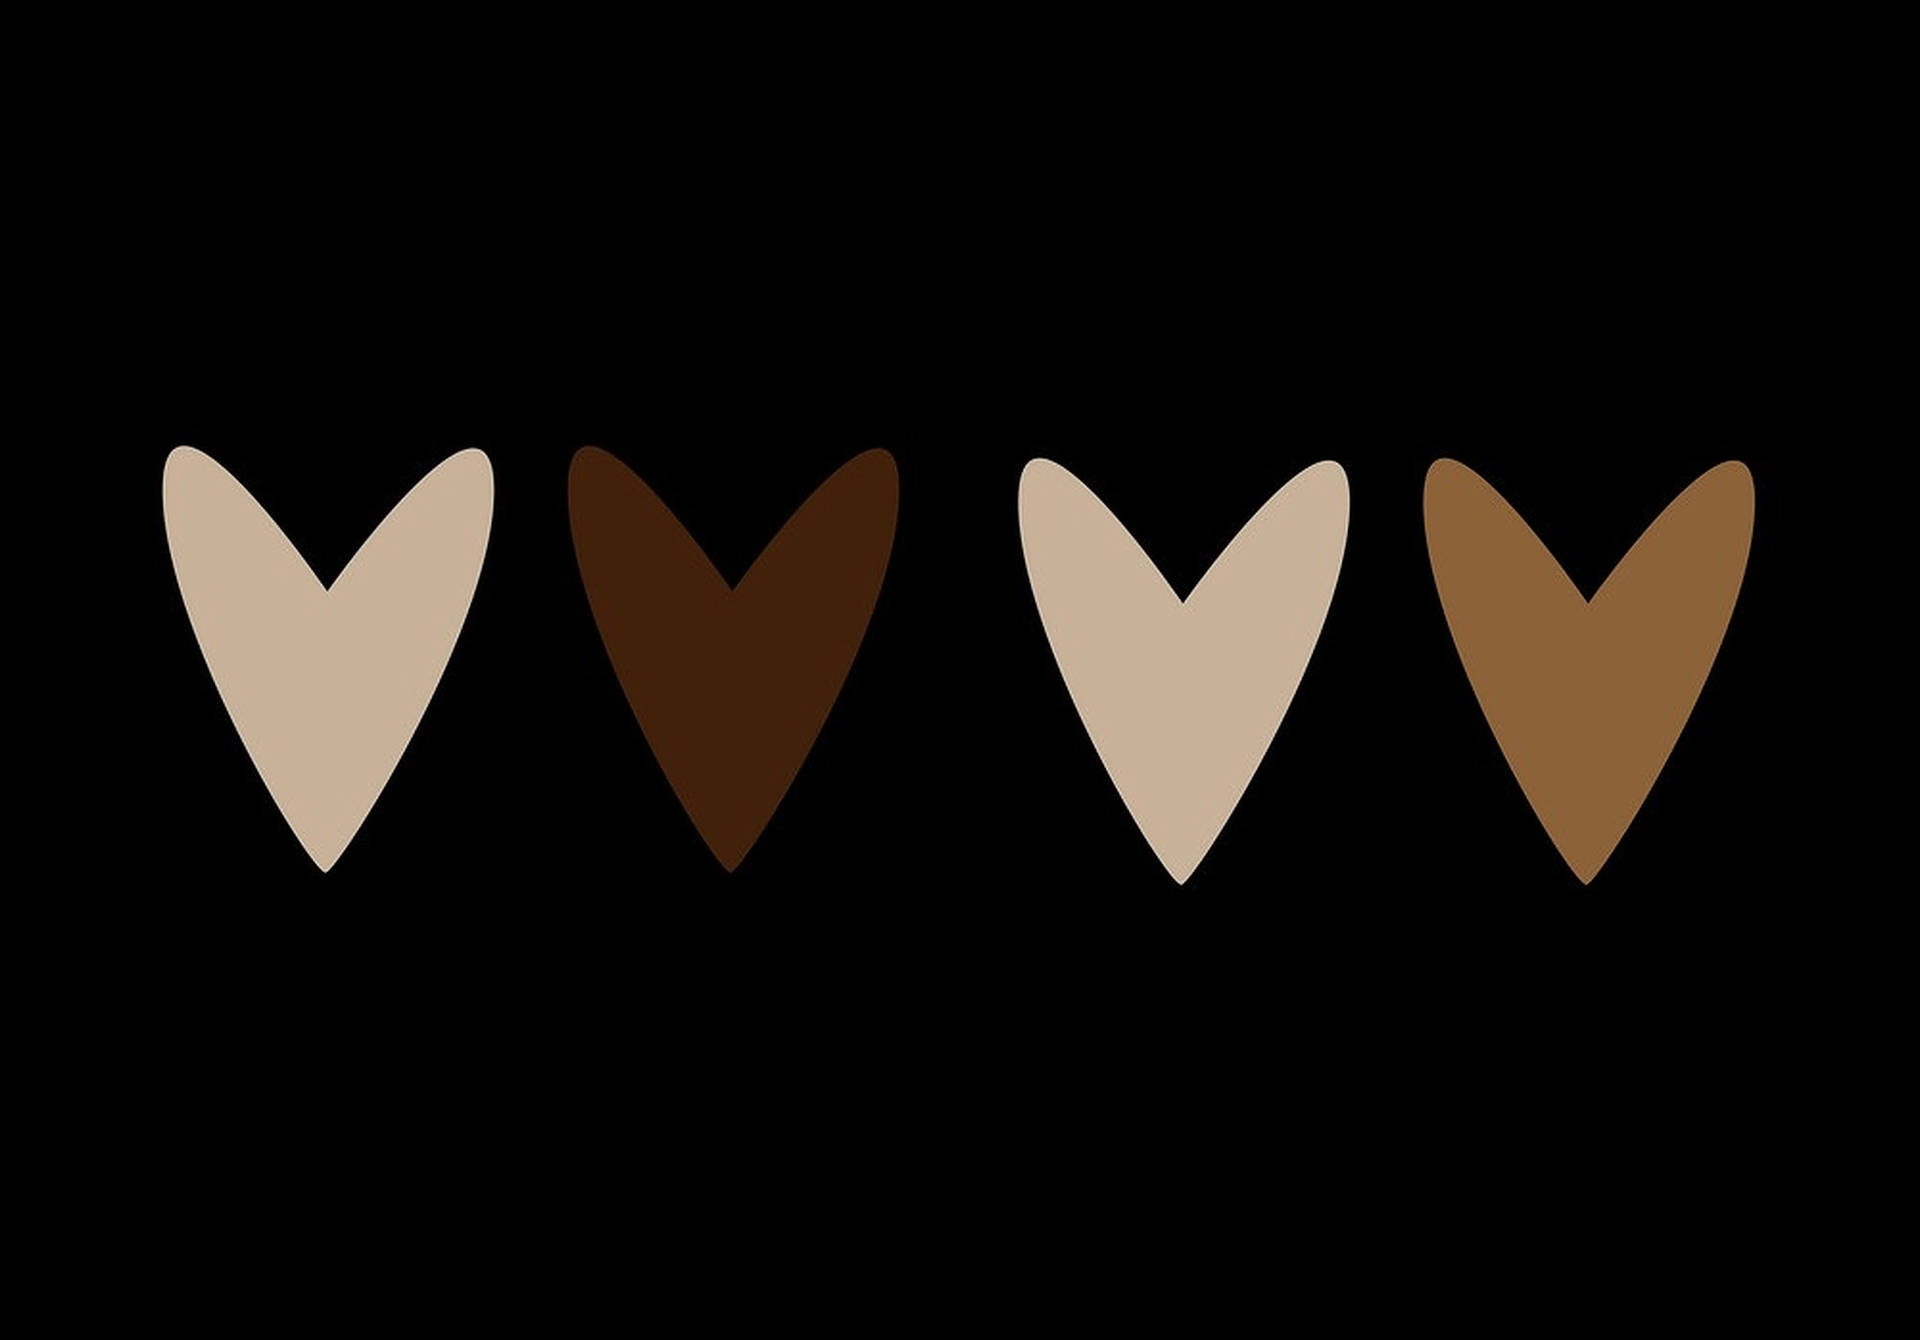 Aesthetic Shades Of Brown Heart Wallpaper